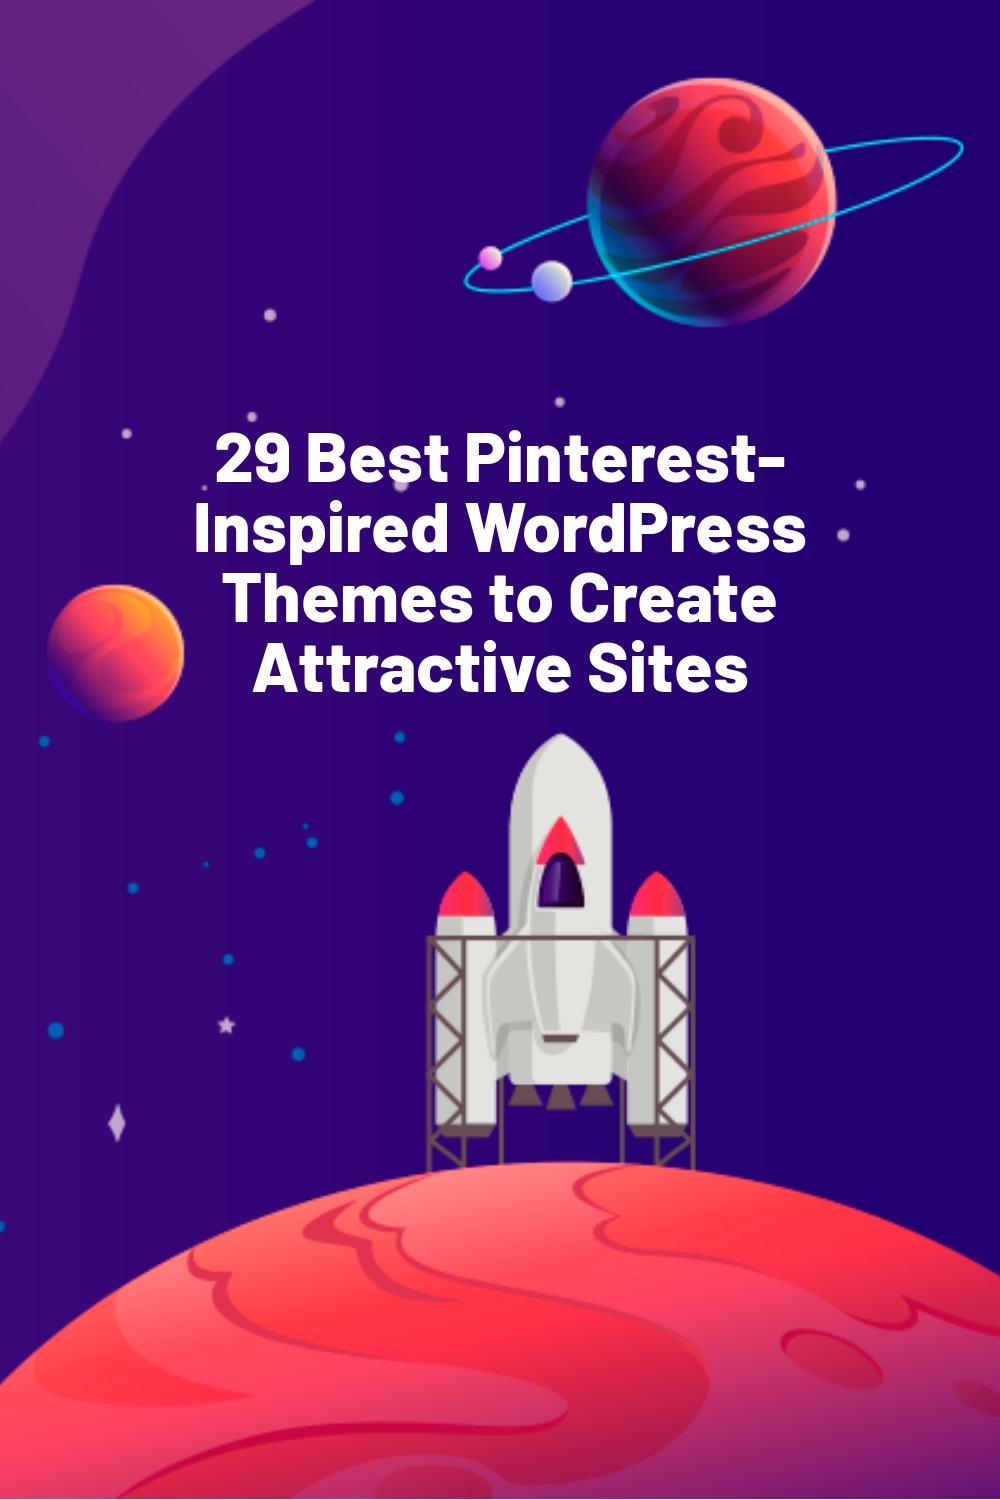 29 Best Pinterest-Inspired WordPress Themes to Create Attractive Sites